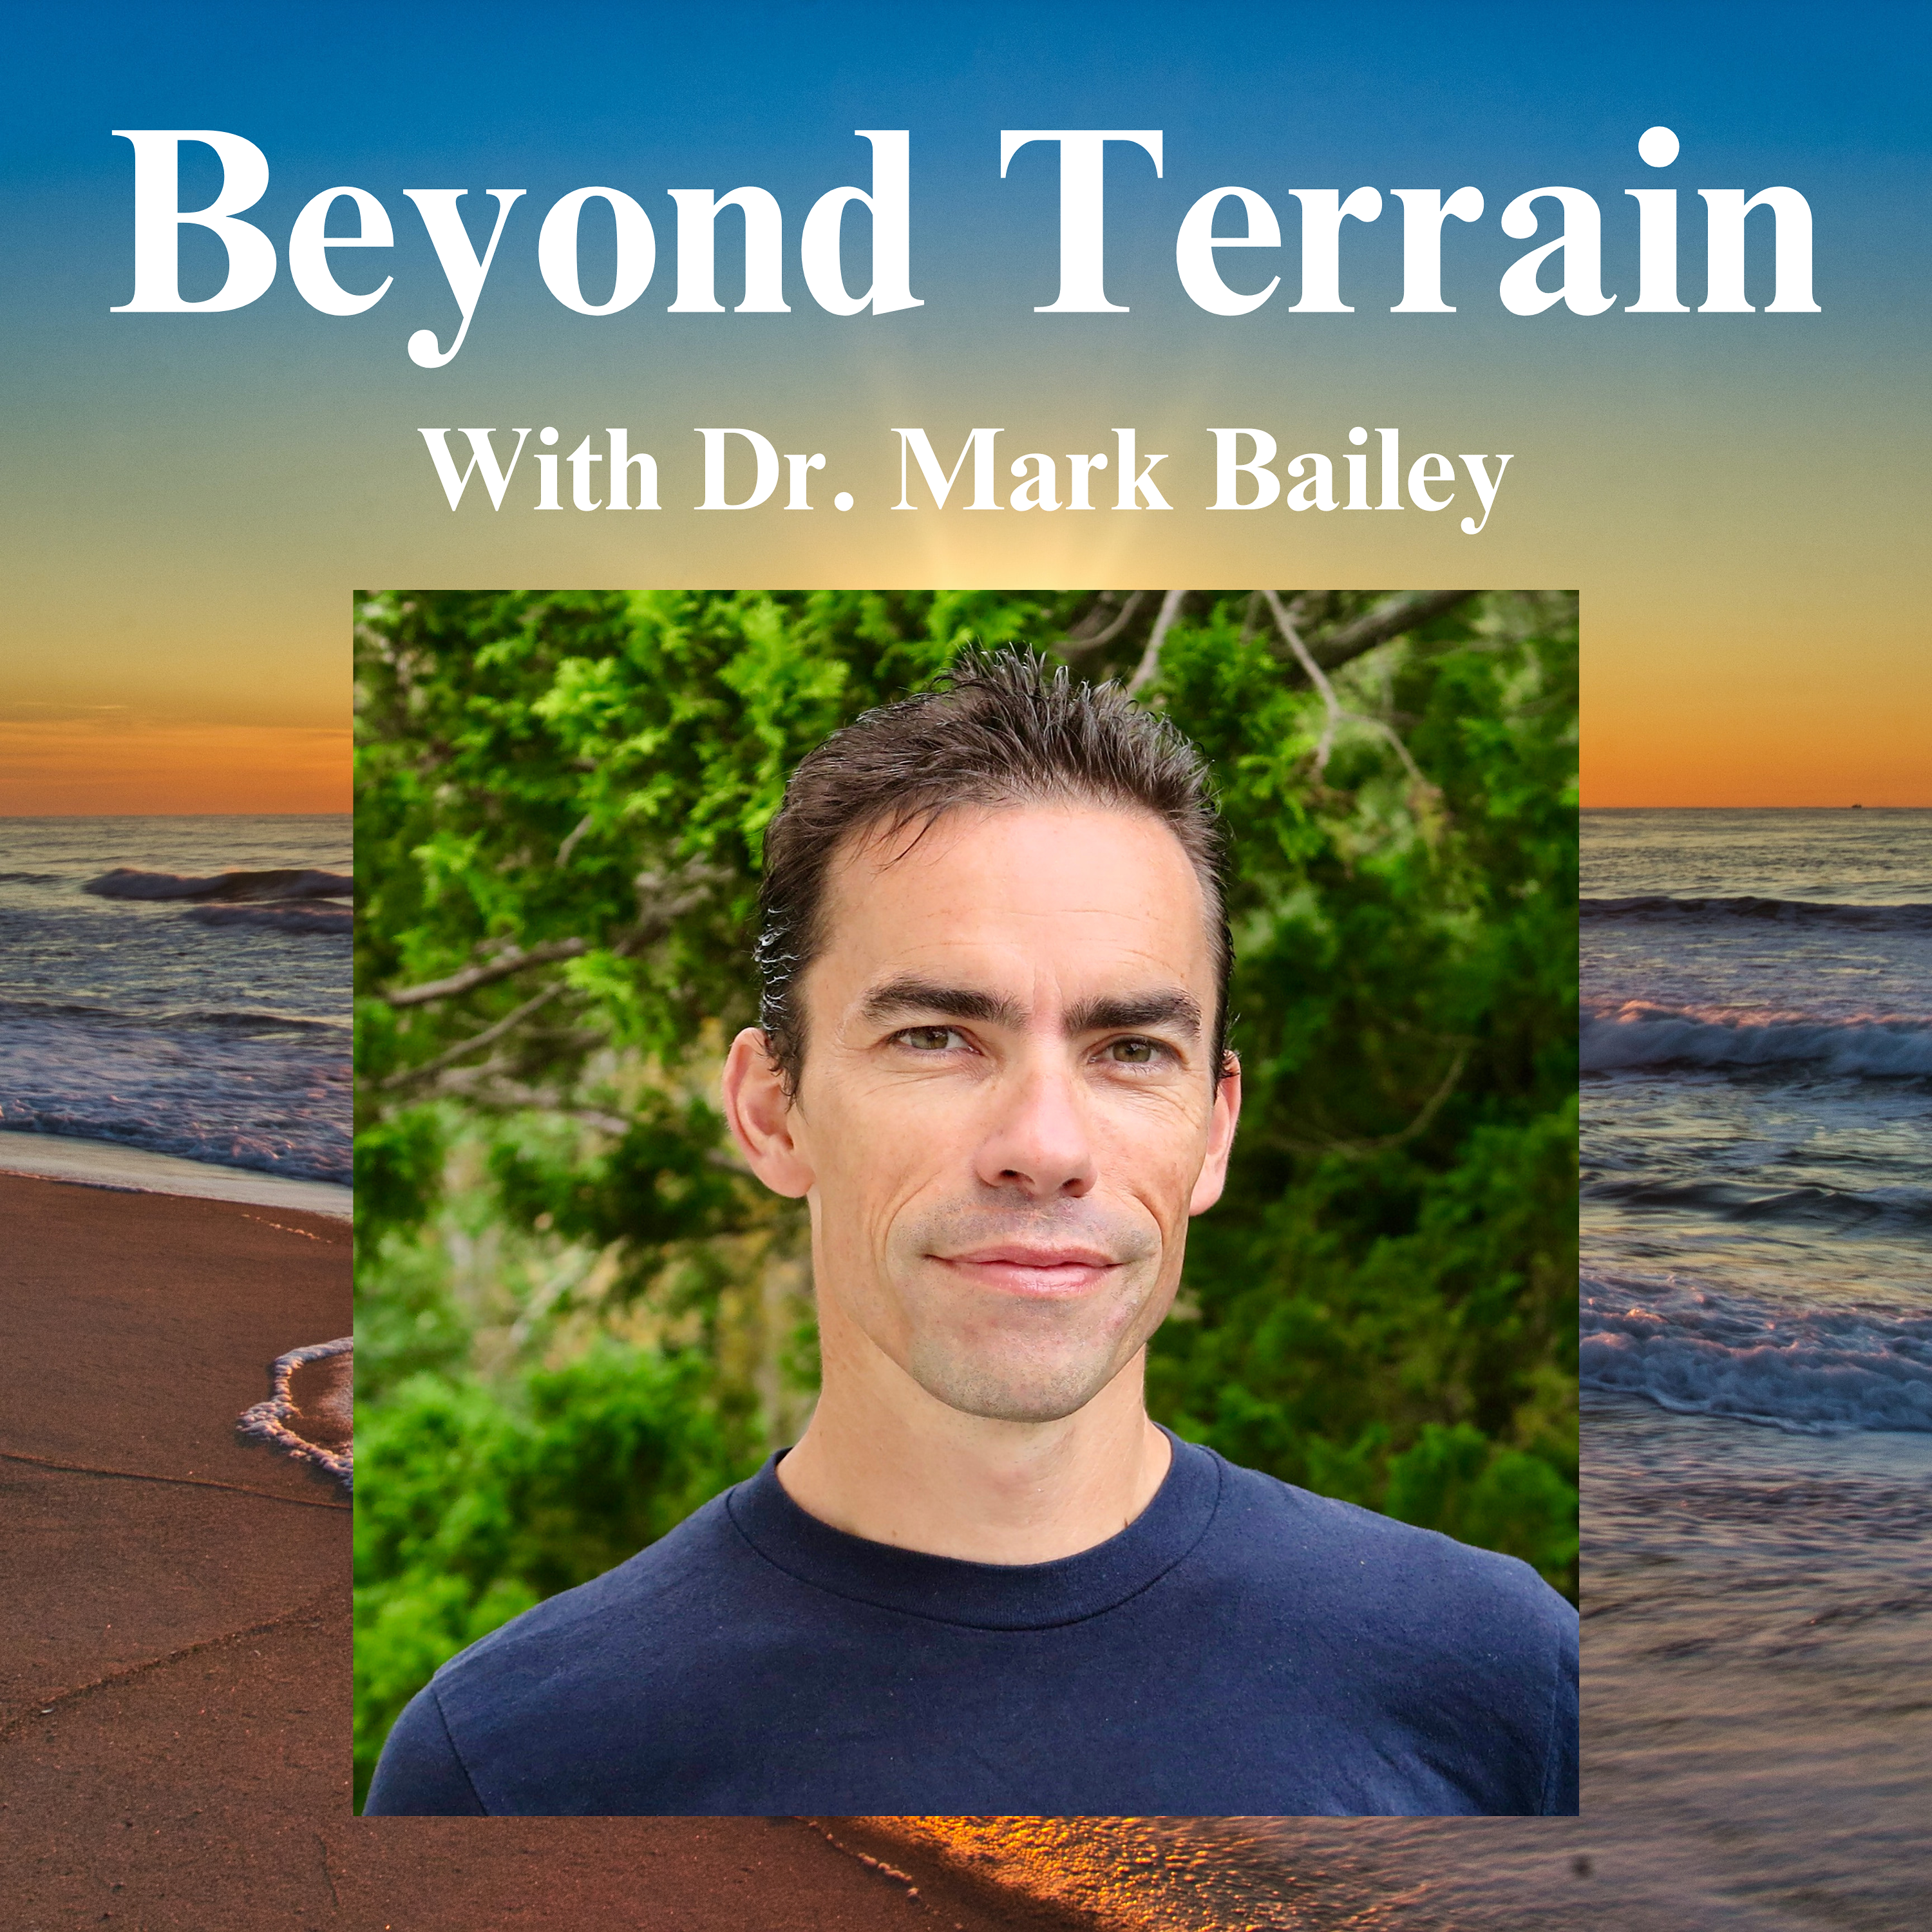 Dr. Mark Bailey on Science, the Health Fields, Looking Upstream, Interventions, Spirituality, and so much more!